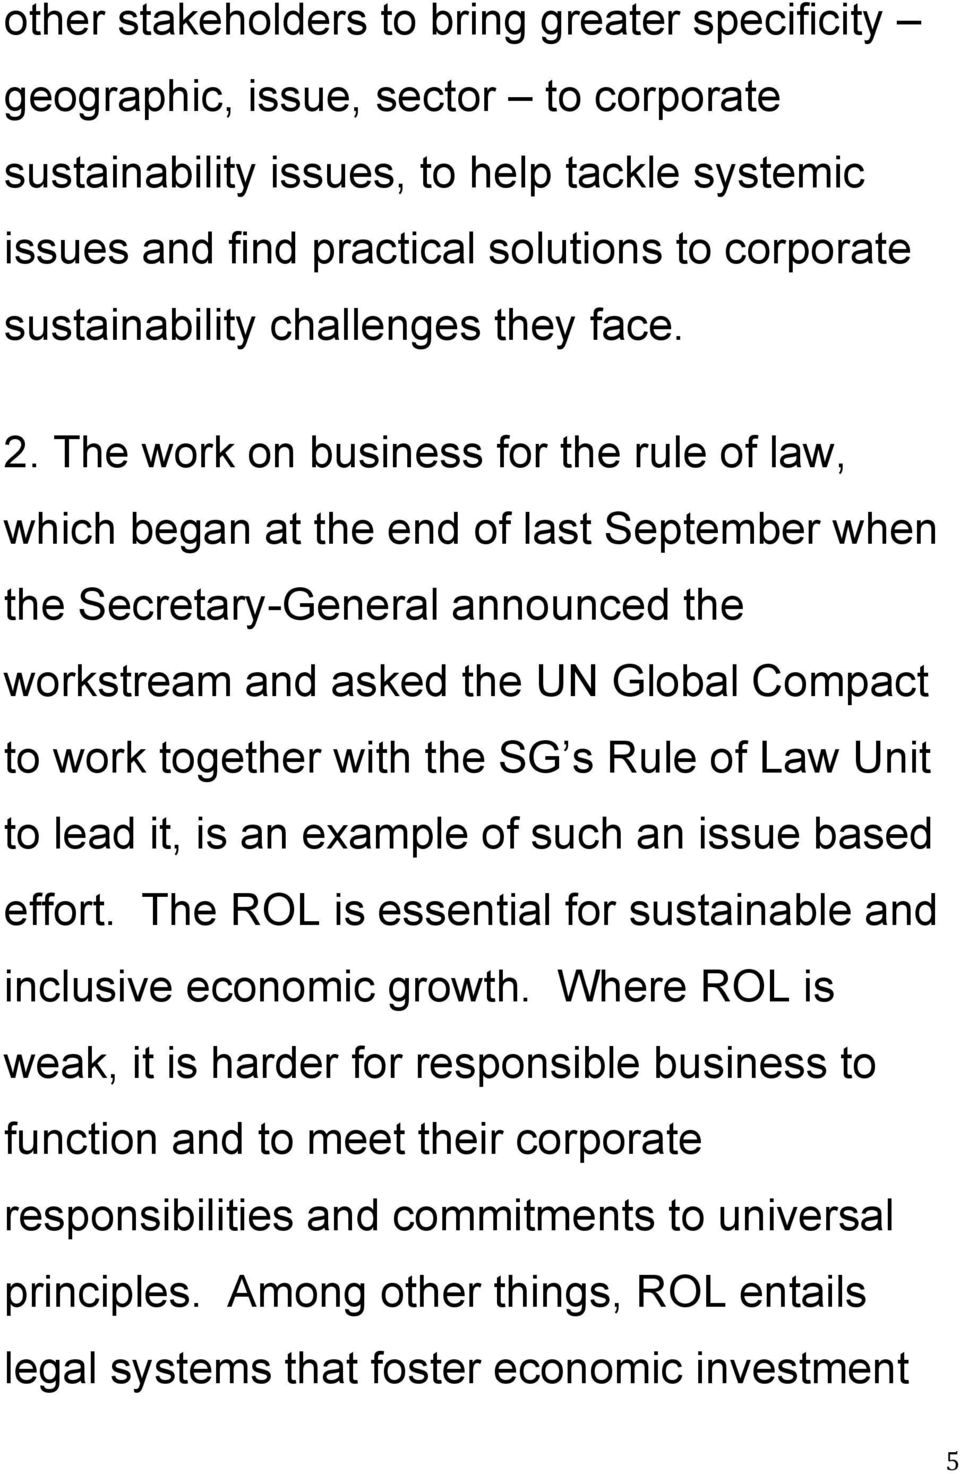 The work on business for the rule of law, which began at the end of last September when the Secretary-General announced the workstream and asked the UN Global Compact to work together with the SG s